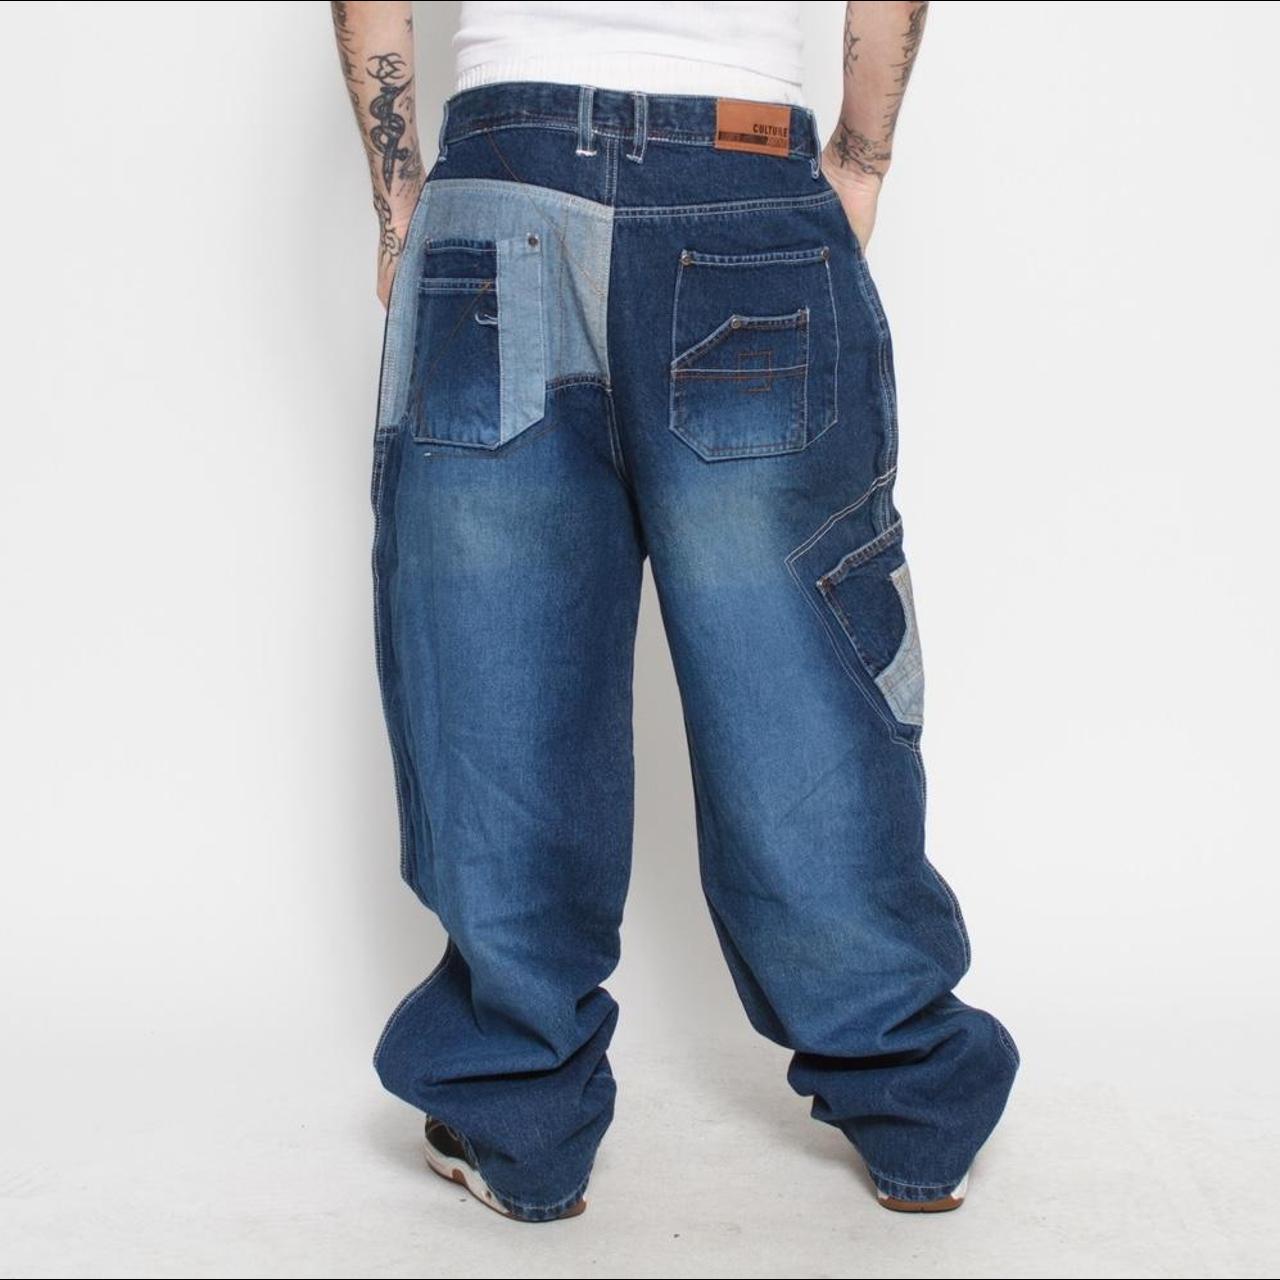 Cultura Men's Navy and Blue Jeans (3)